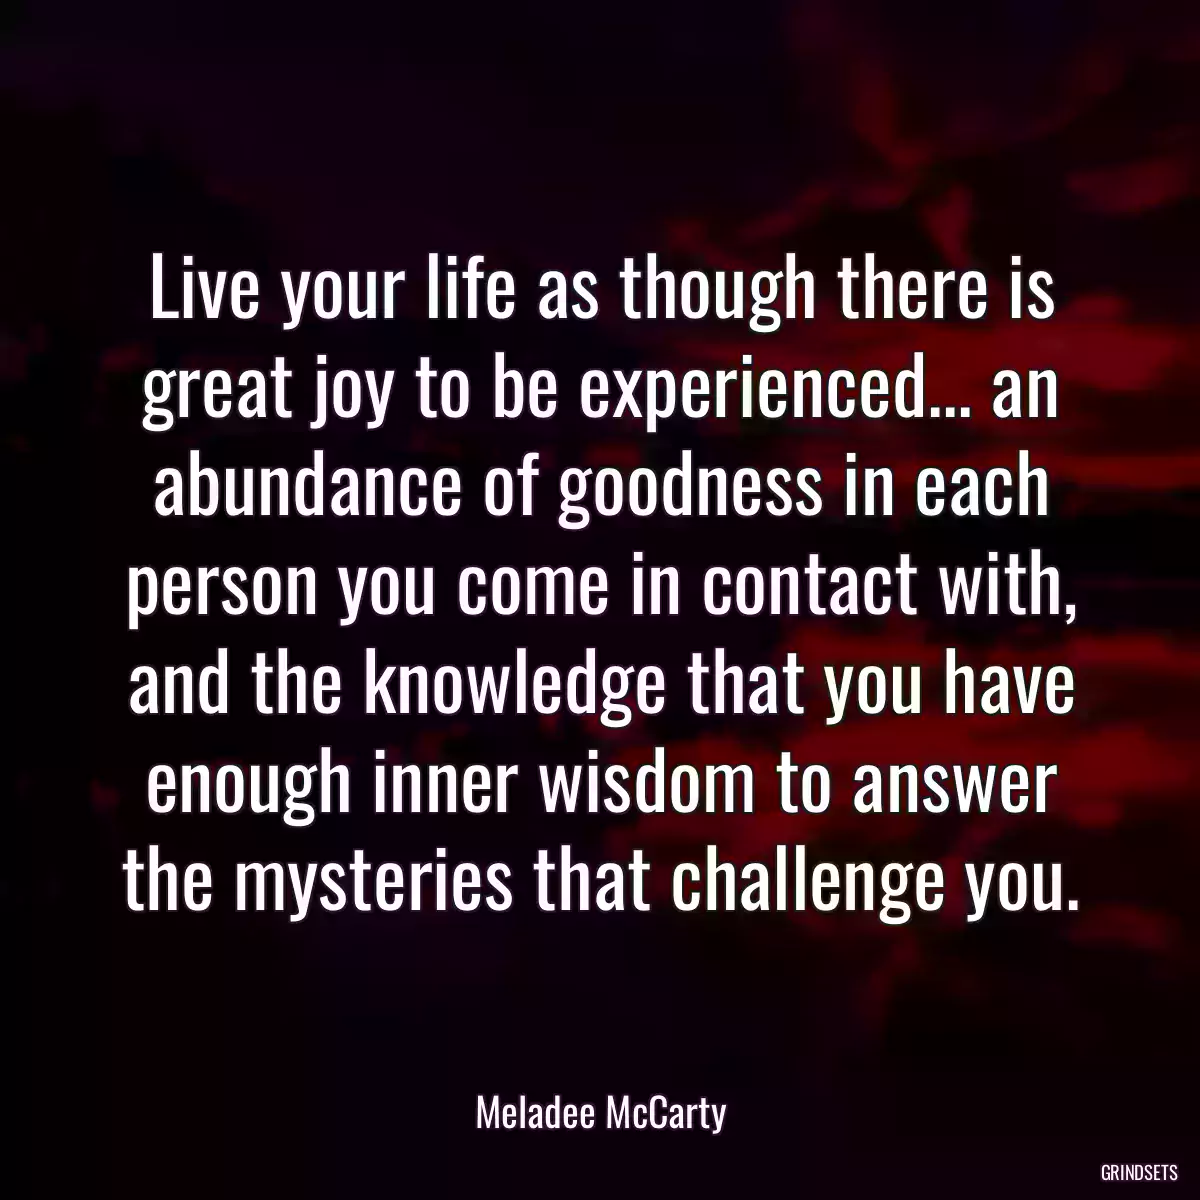 Live your life as though there is great joy to be experienced... an abundance of goodness in each person you come in contact with, and the knowledge that you have enough inner wisdom to answer the mysteries that challenge you.